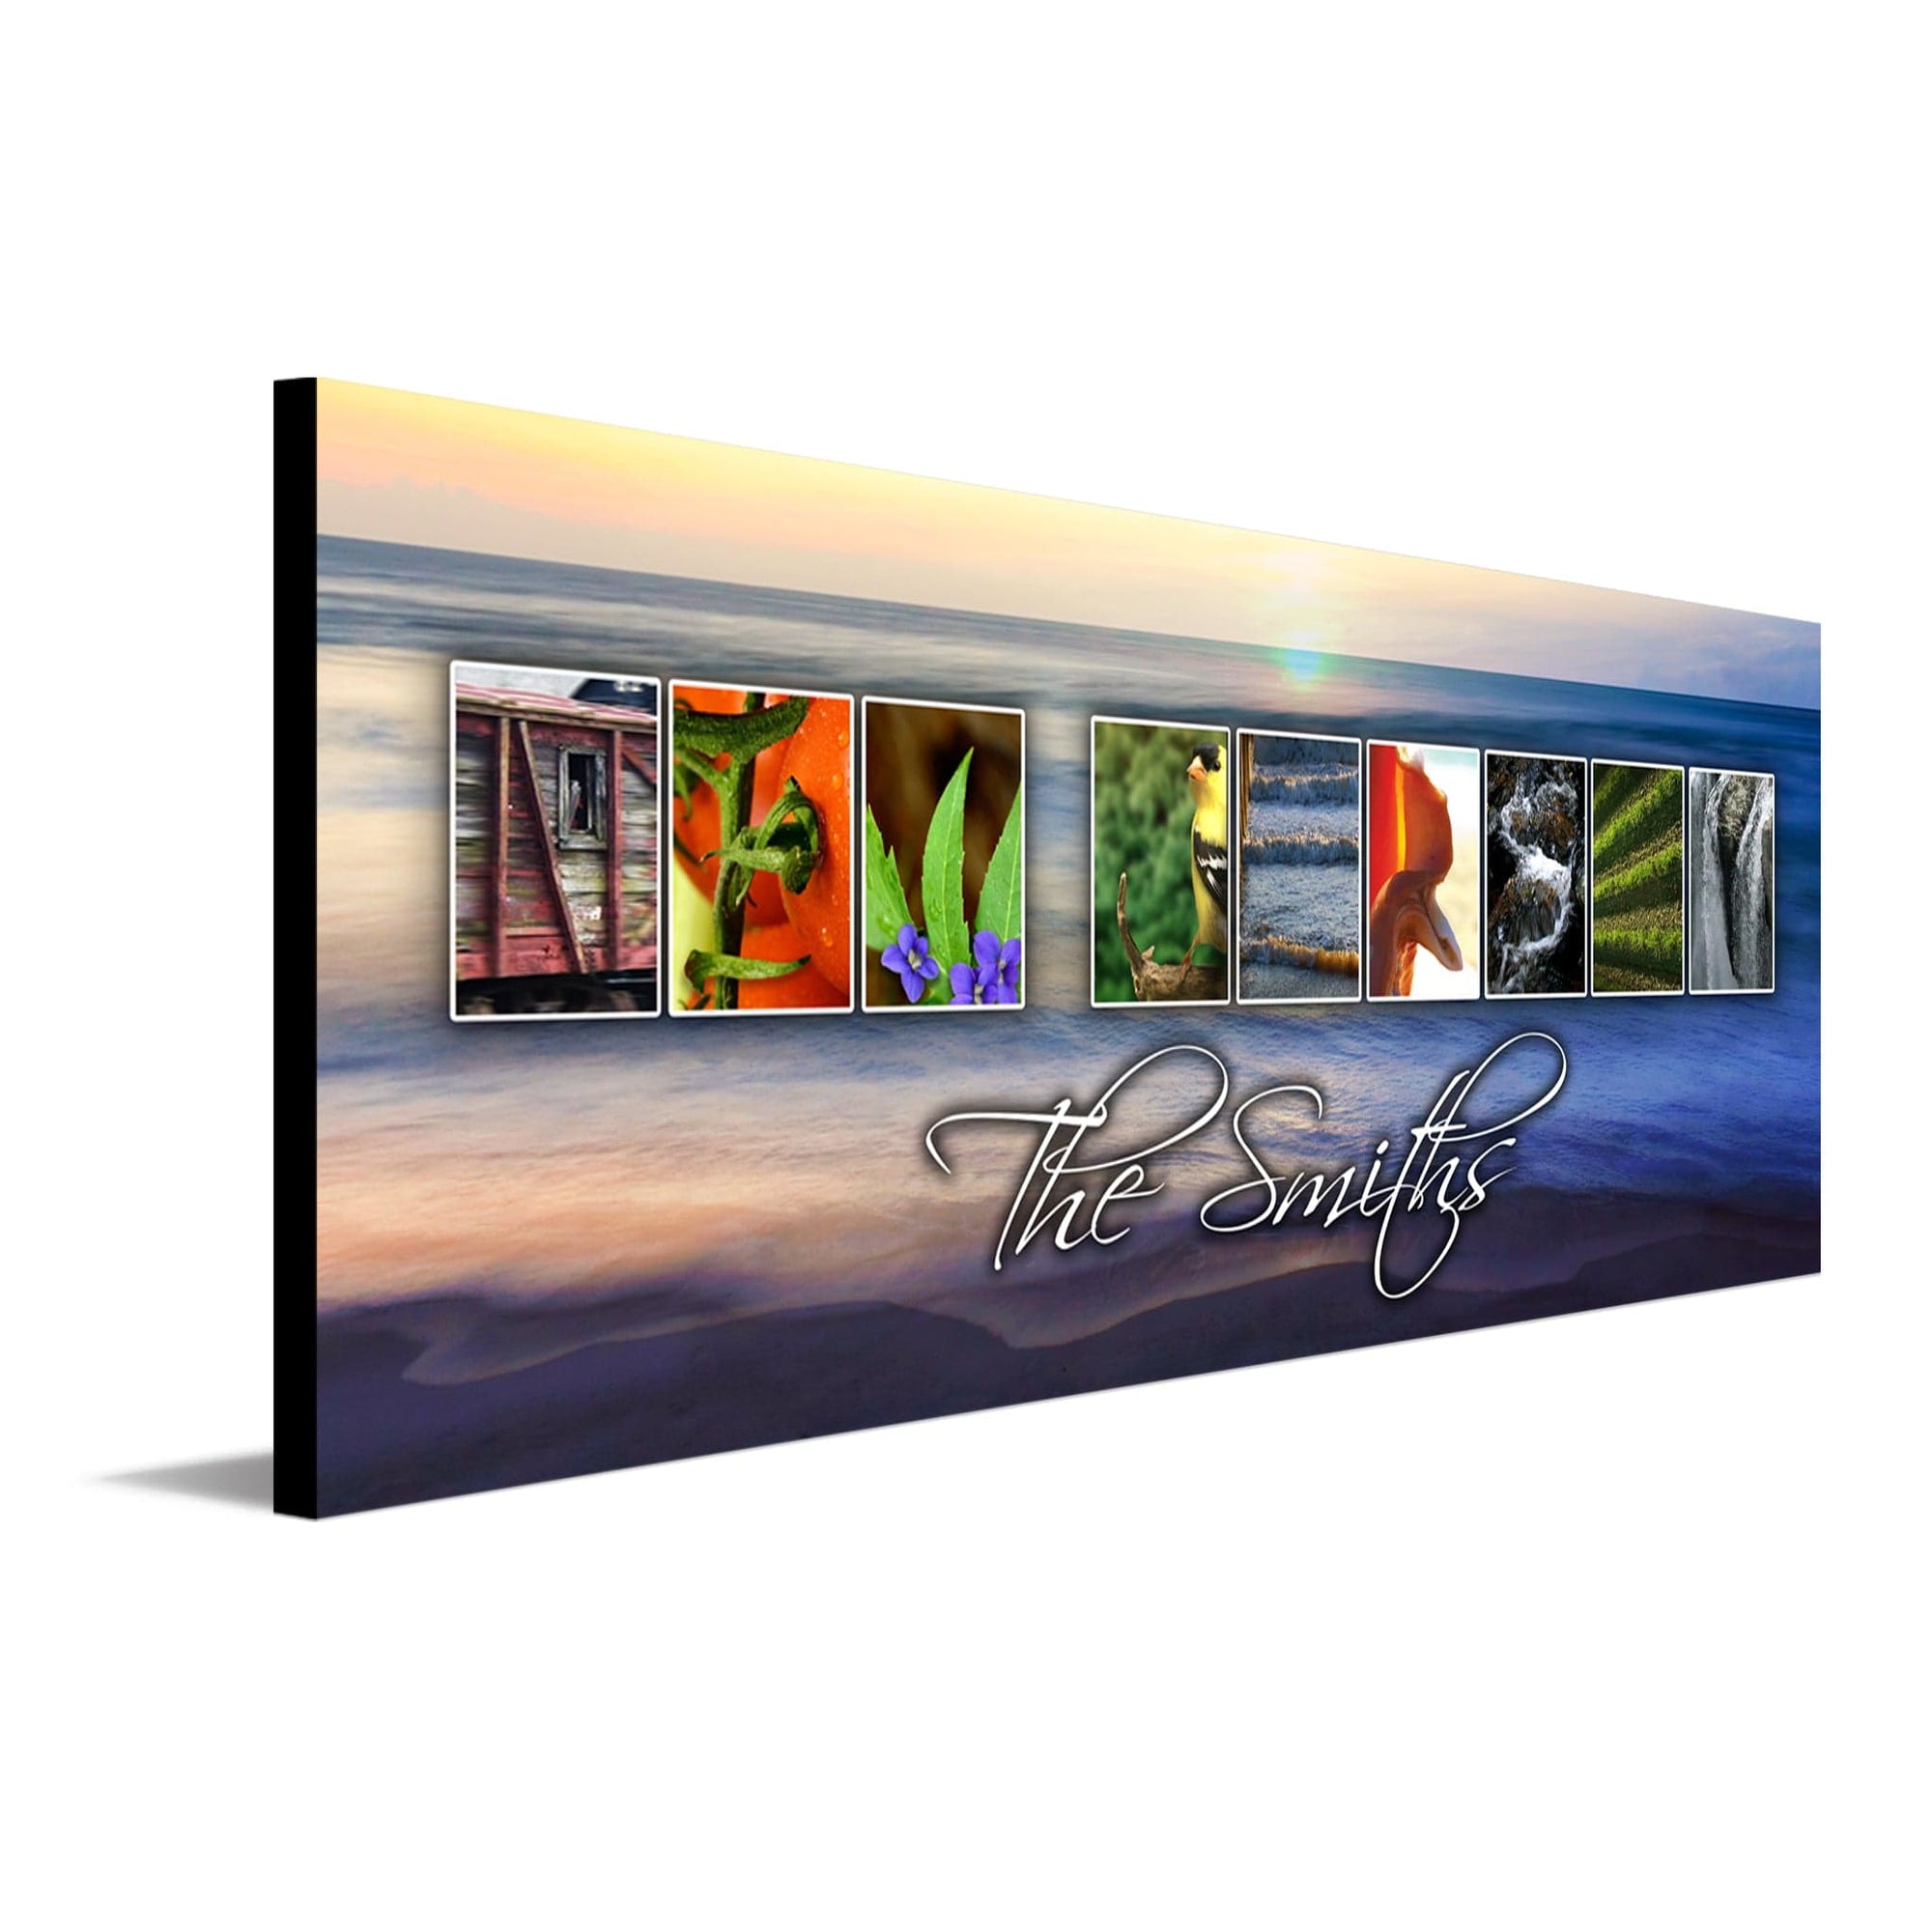 Personalized New Jersey art using images to spell the word New Jersey - Personal-Prints